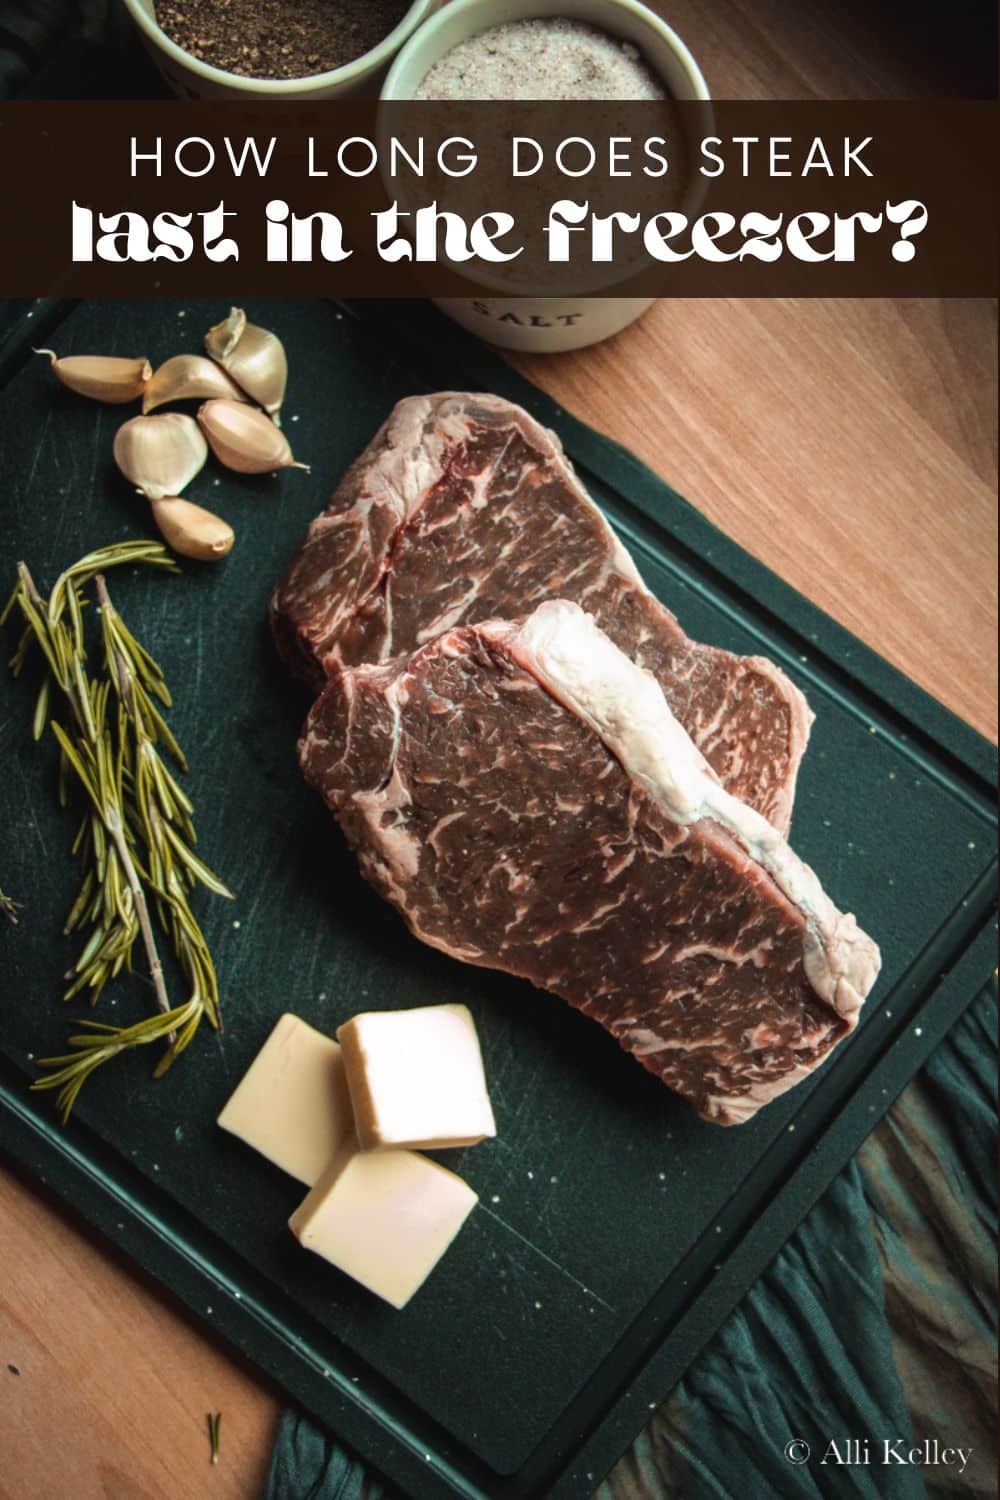 Steak is a much-loved dish that can be served in many excellent ways. Its rich flavor, texture, and juicy tenderness make it a favorite for any occasion. But if you have leftovers or want to stock up on steak to save time and money, how long does steak last in the freezer?